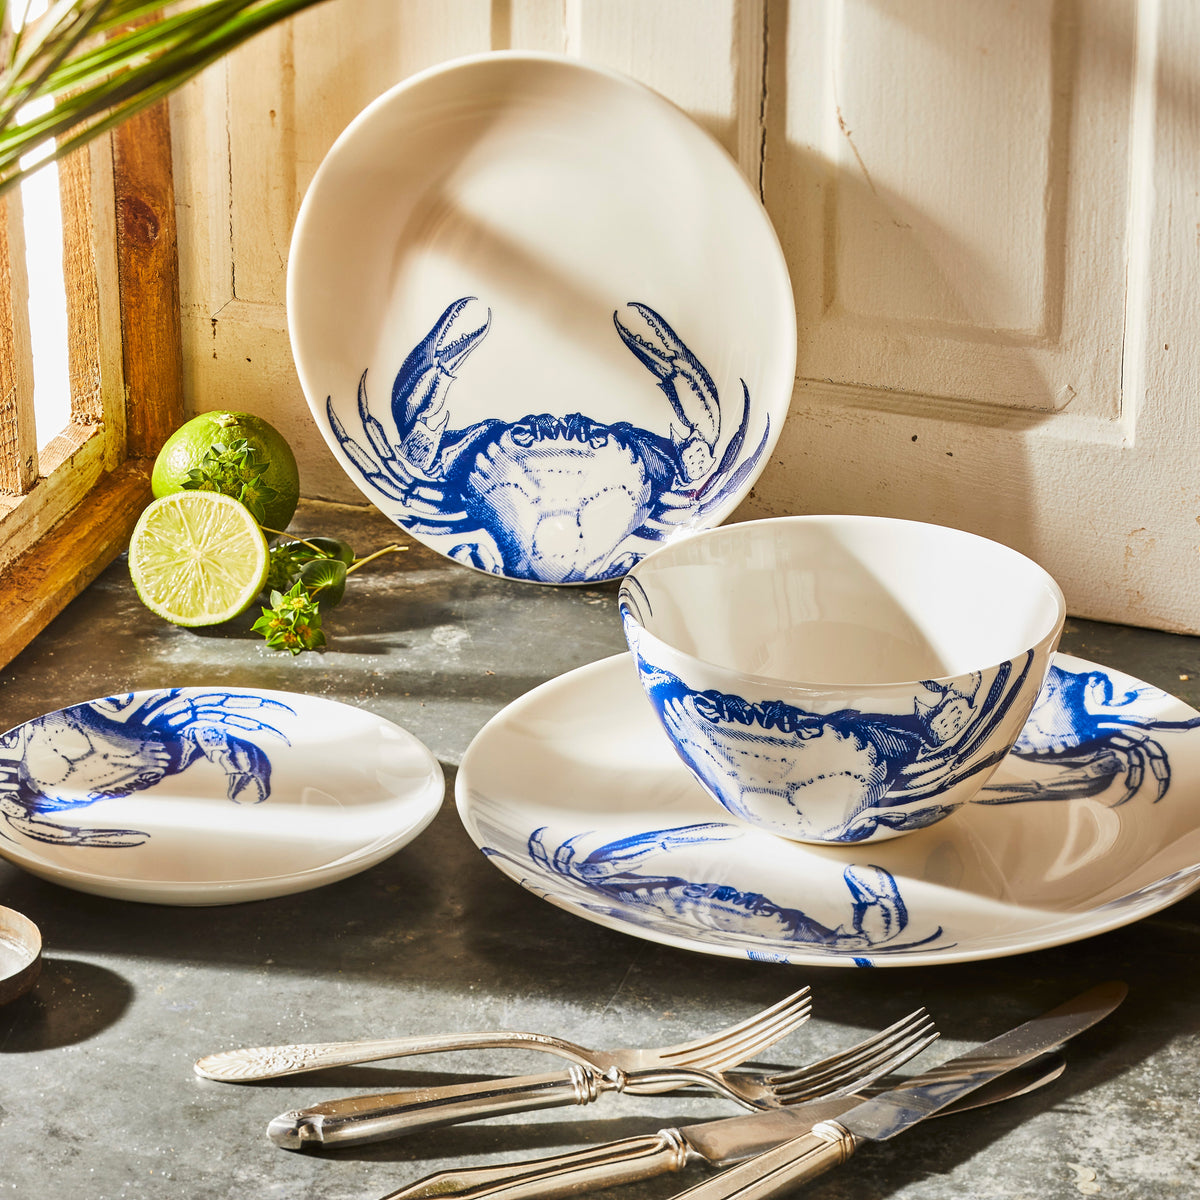 Caskata Crab Cereal Bowl with a blue crabs pattern, including a plate and smaller dishes, are arranged on a kitchen counter near a window with two limes and assorted silverware nearby.